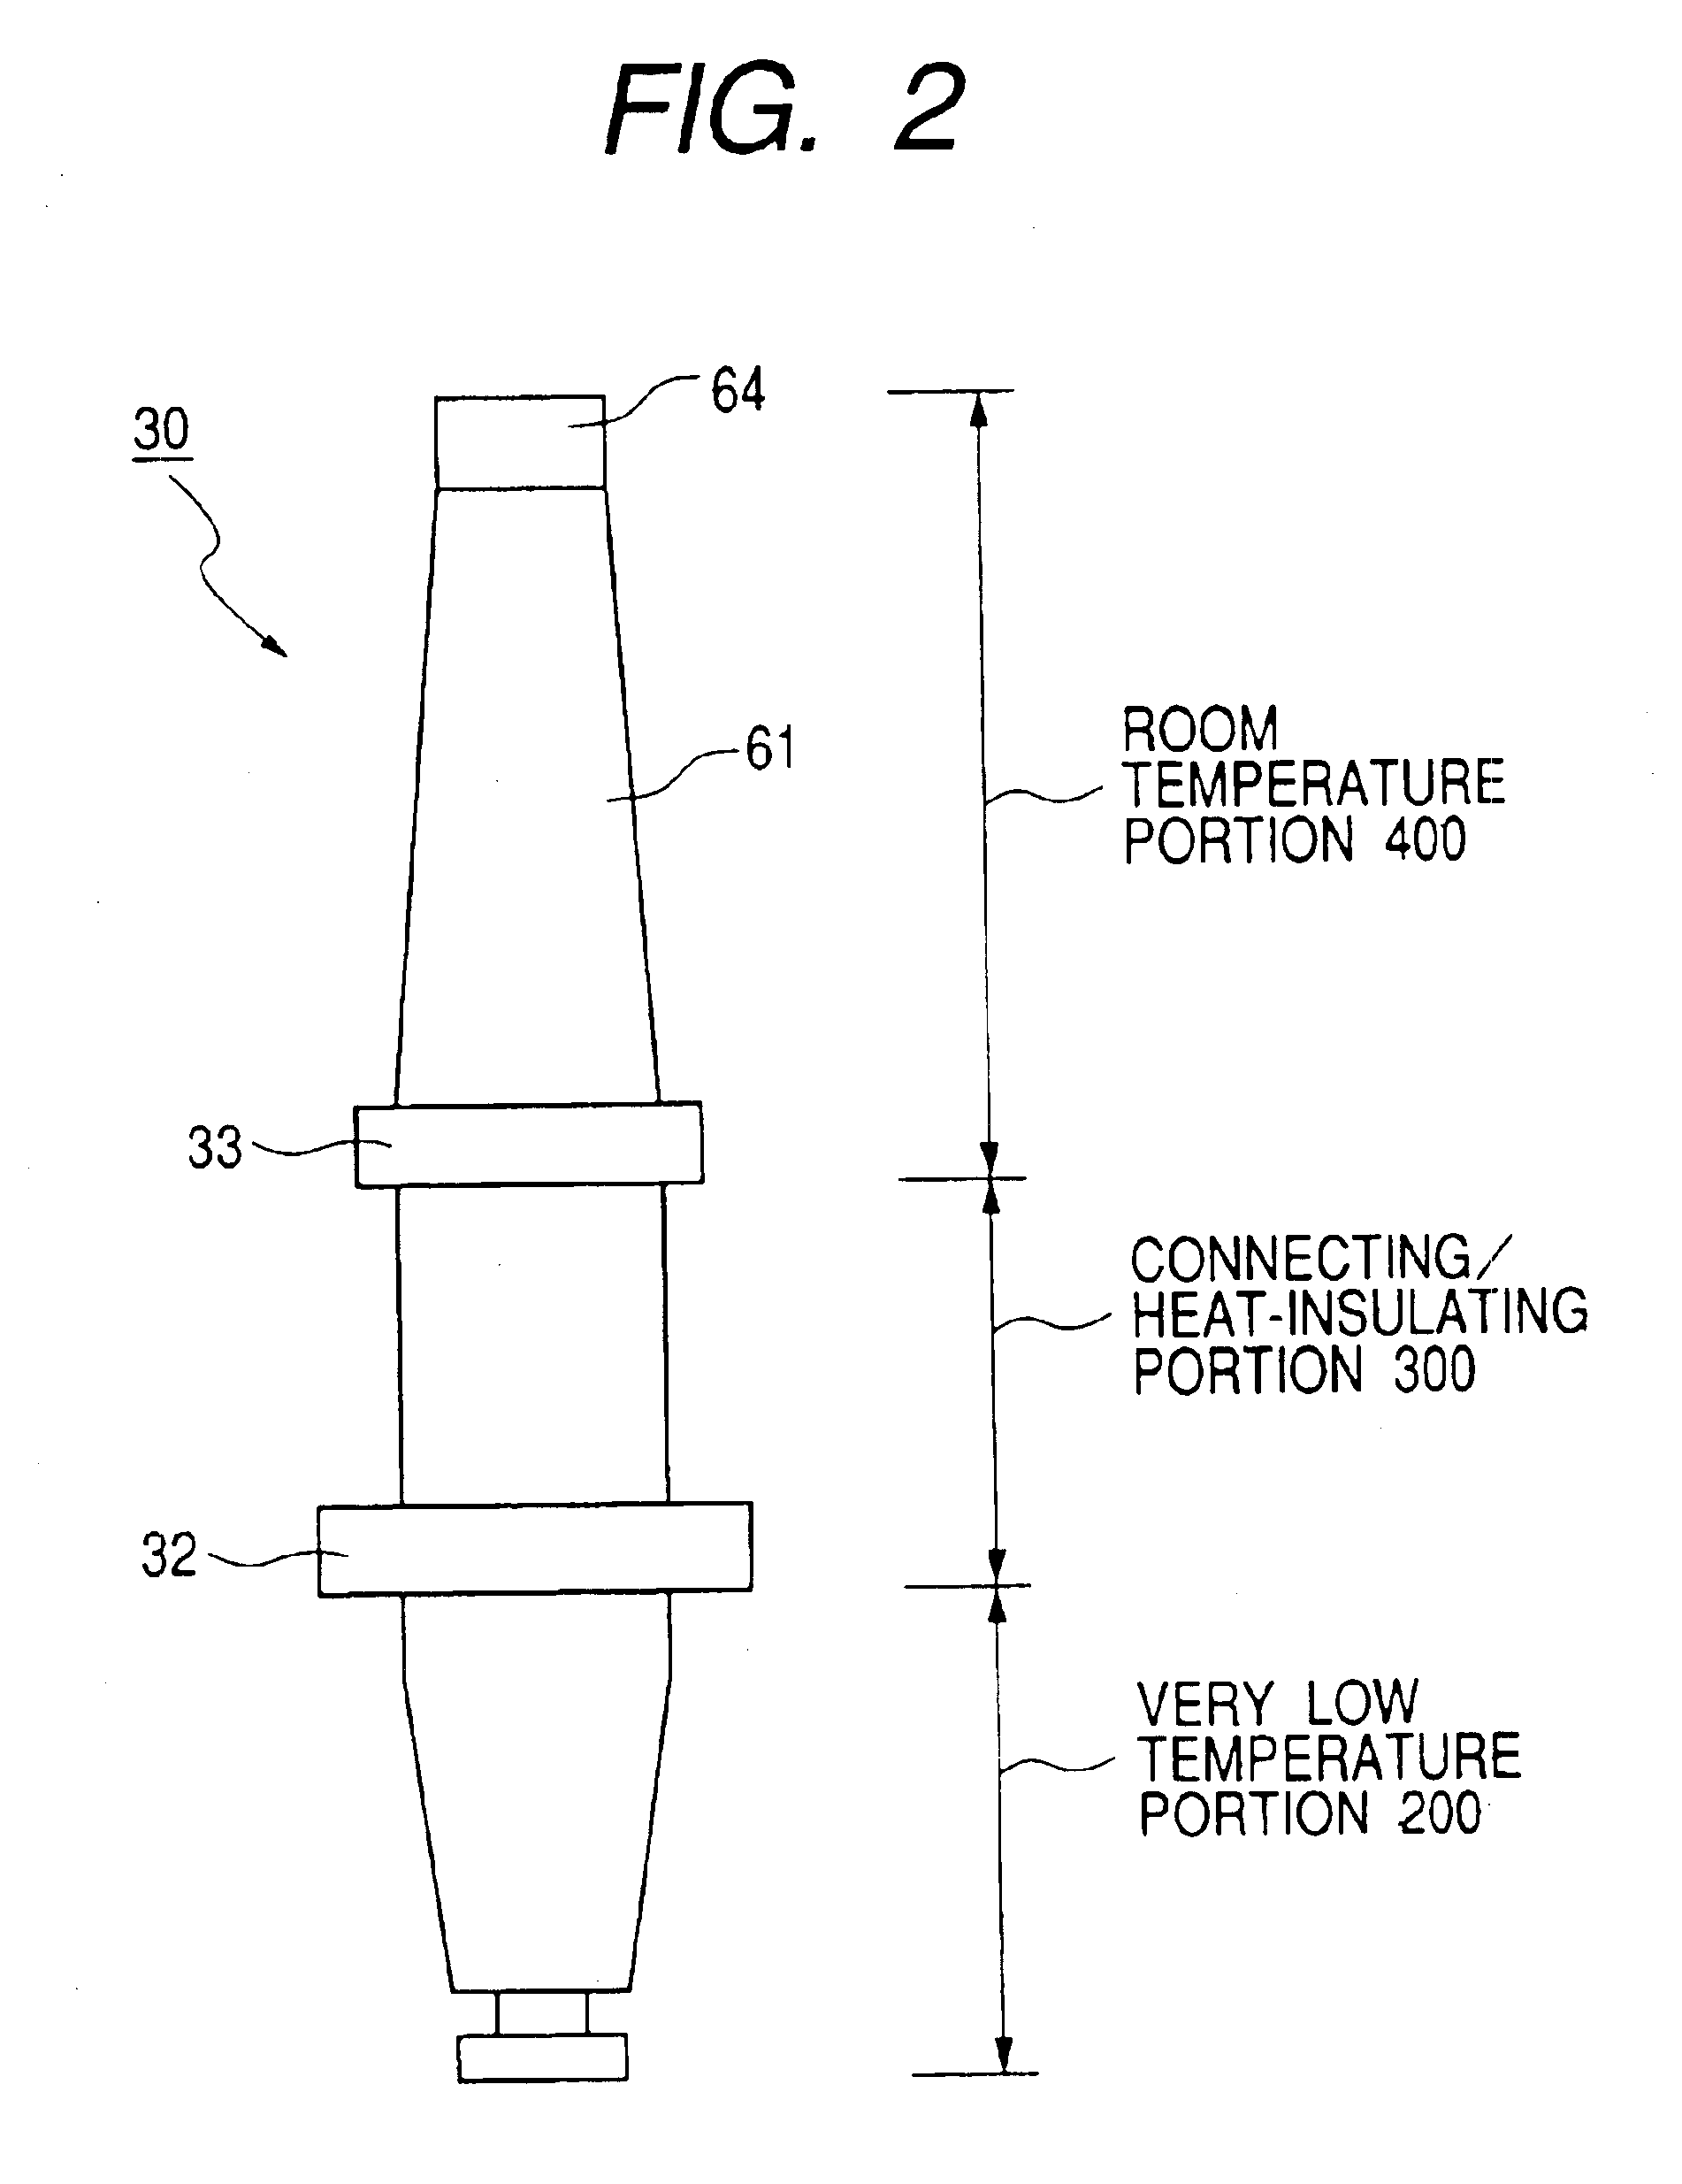 Terminal structure of extreme-low temperature equipment